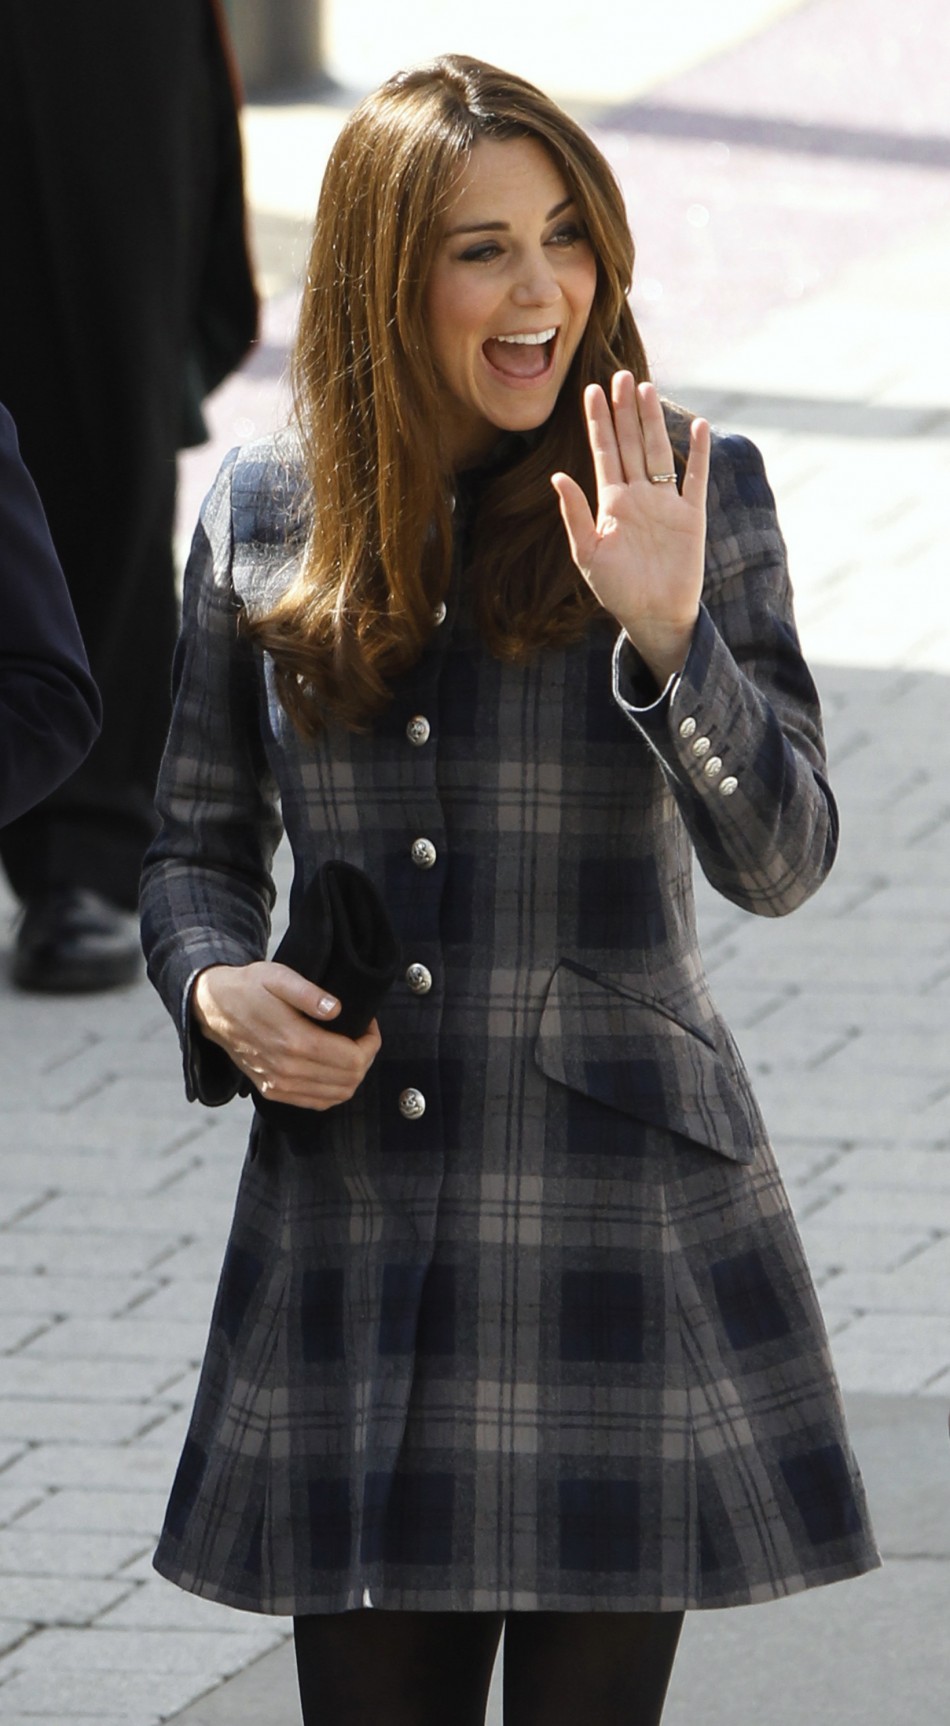 Britains Catherine, Duchess of Cambridge waves as she arrive for a visit to the Emirates Arena in Glasgow, Scotland April 4, 2013.